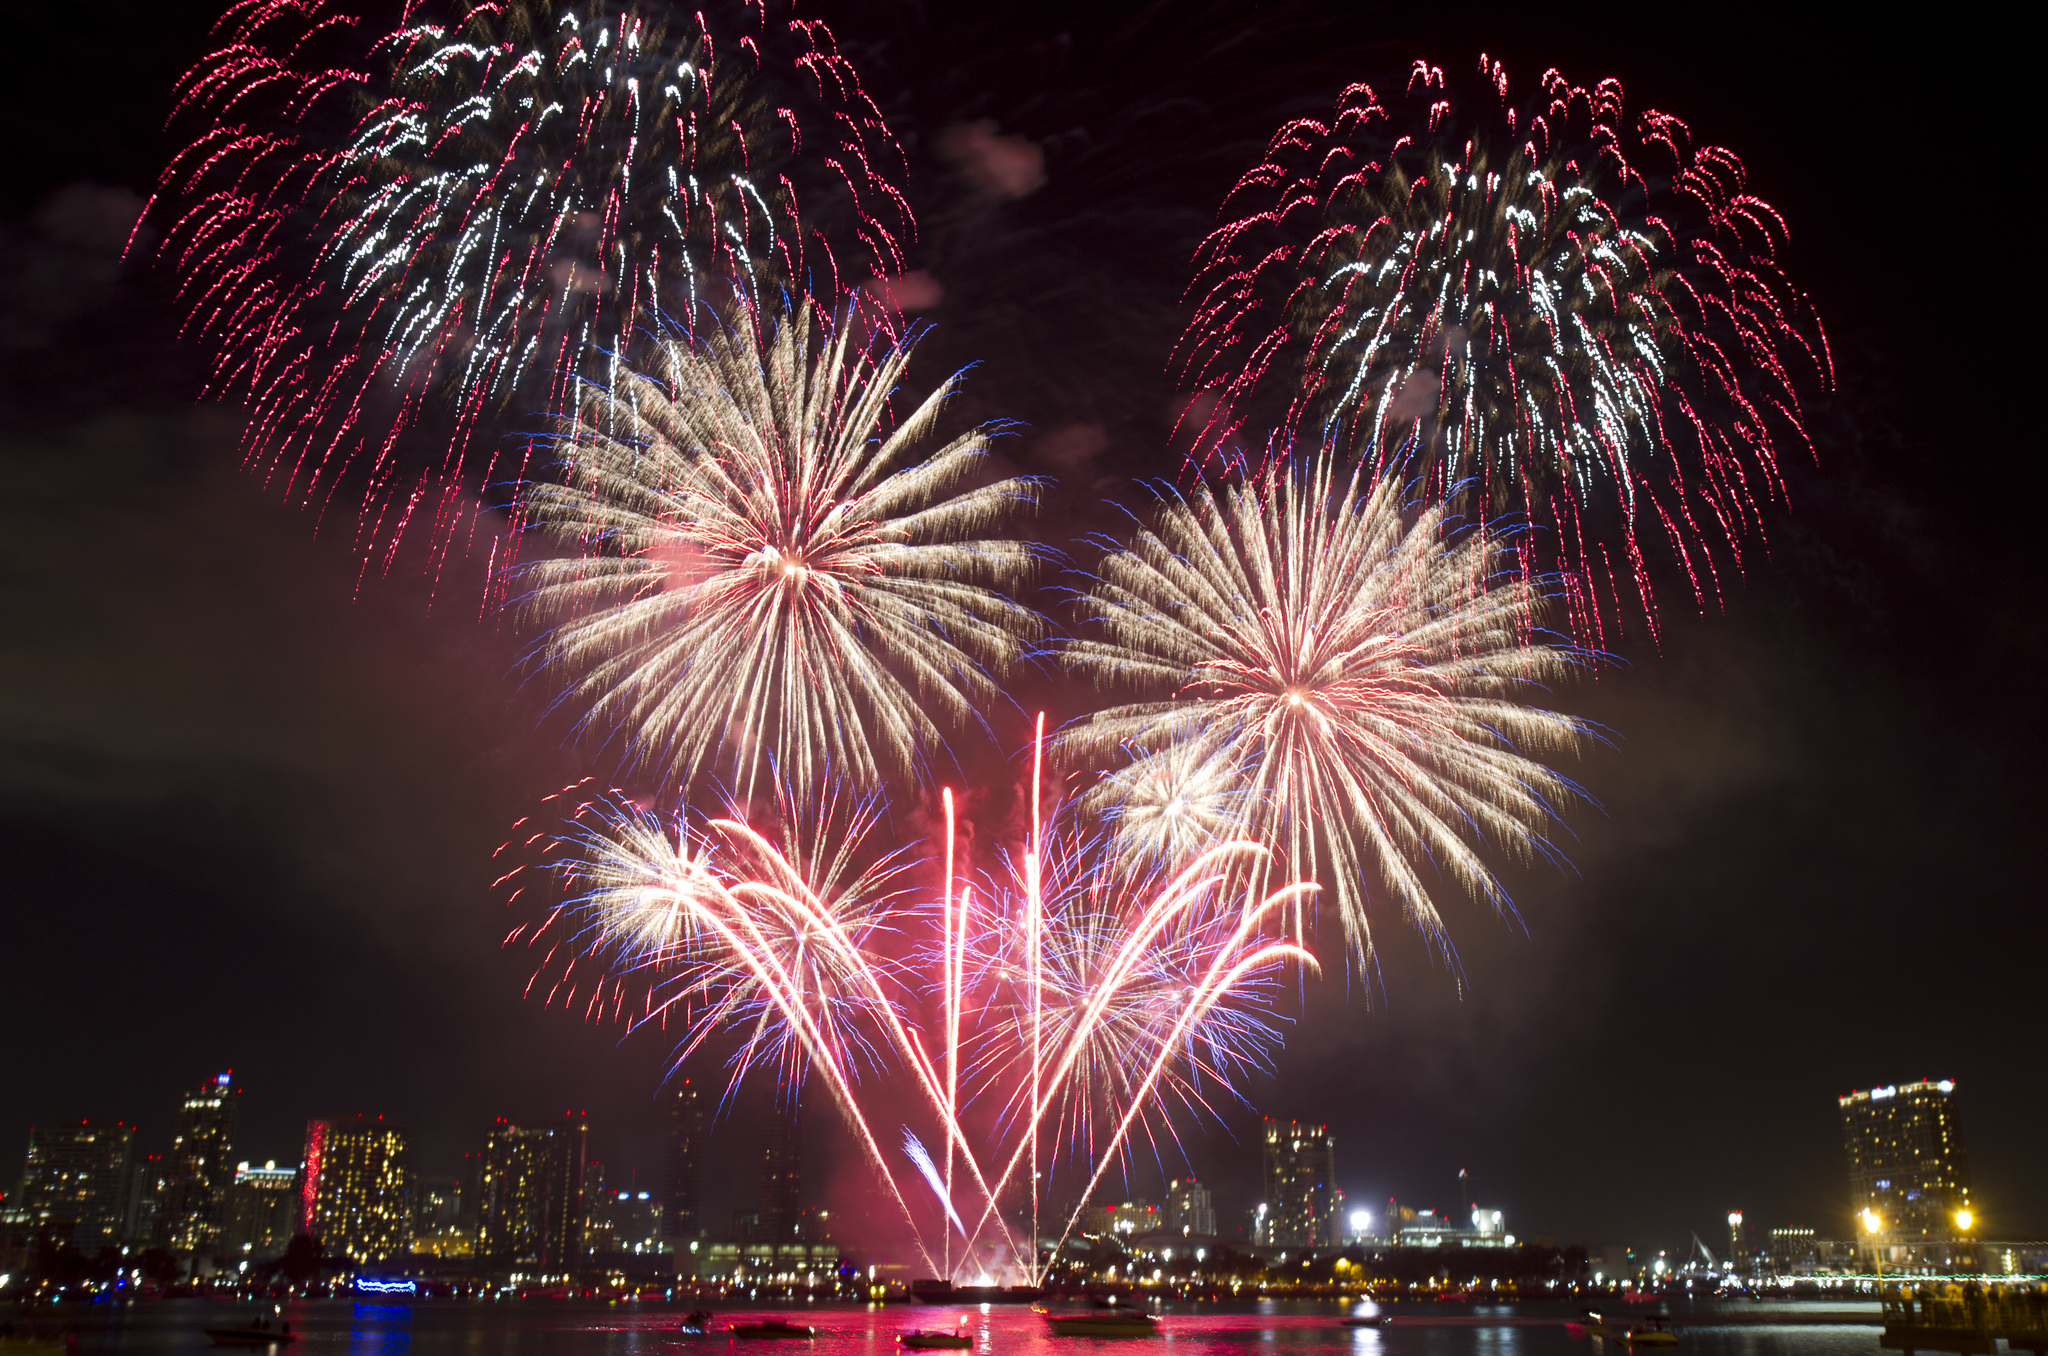 The Best Fireworks Displays In Southern California In 2016 Cities